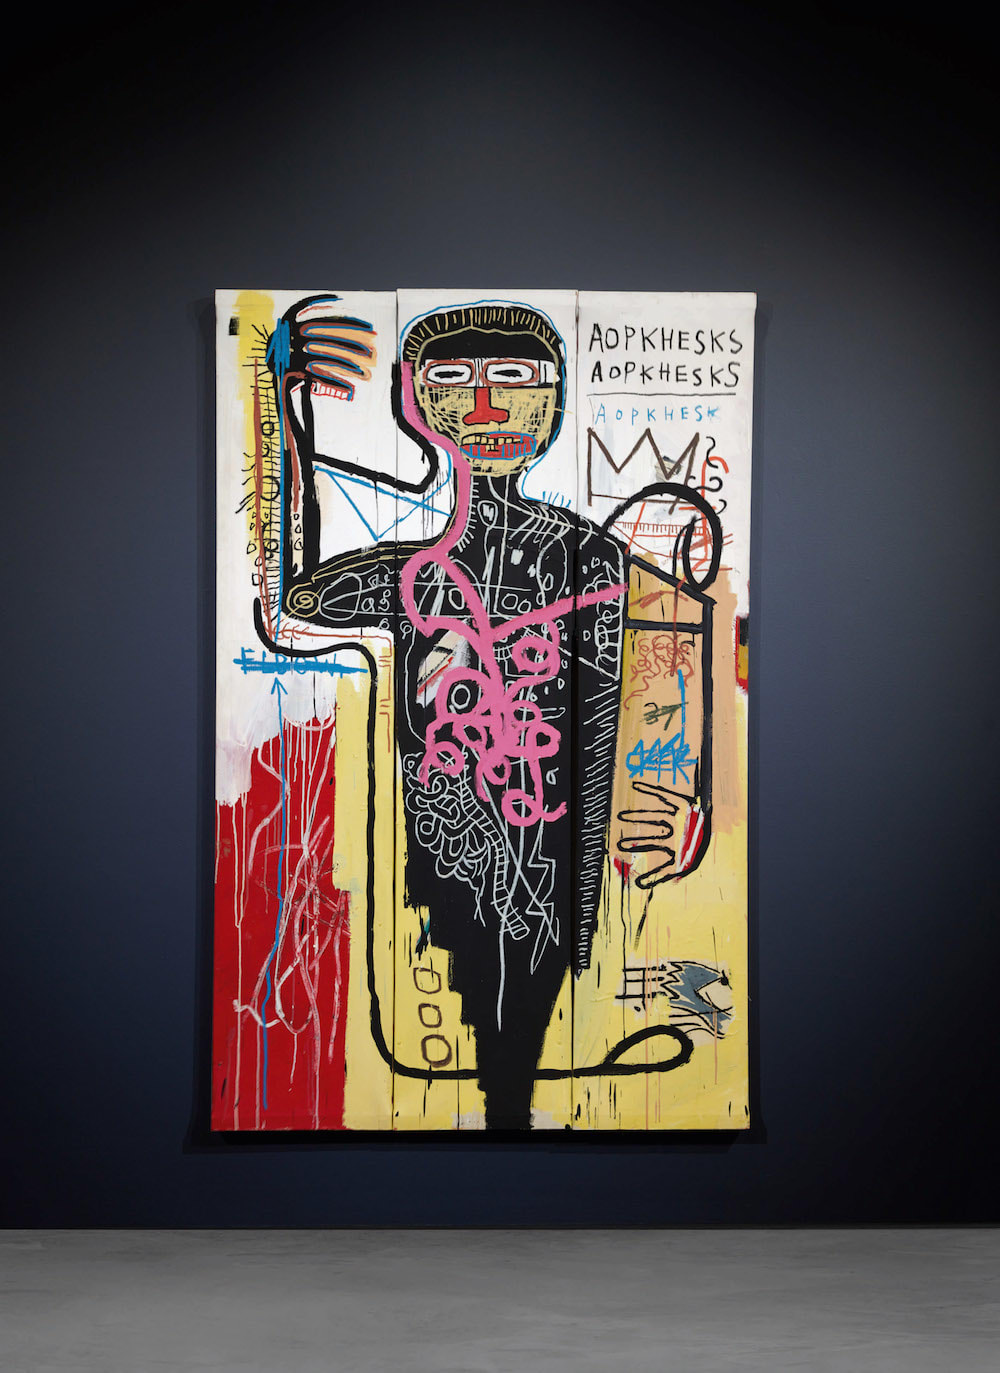 Fierce Competition for Rising Stars—and, Yes, a Major Basquiat—Propelled Sotheby's Evening Sale to a Whopping $567 Million